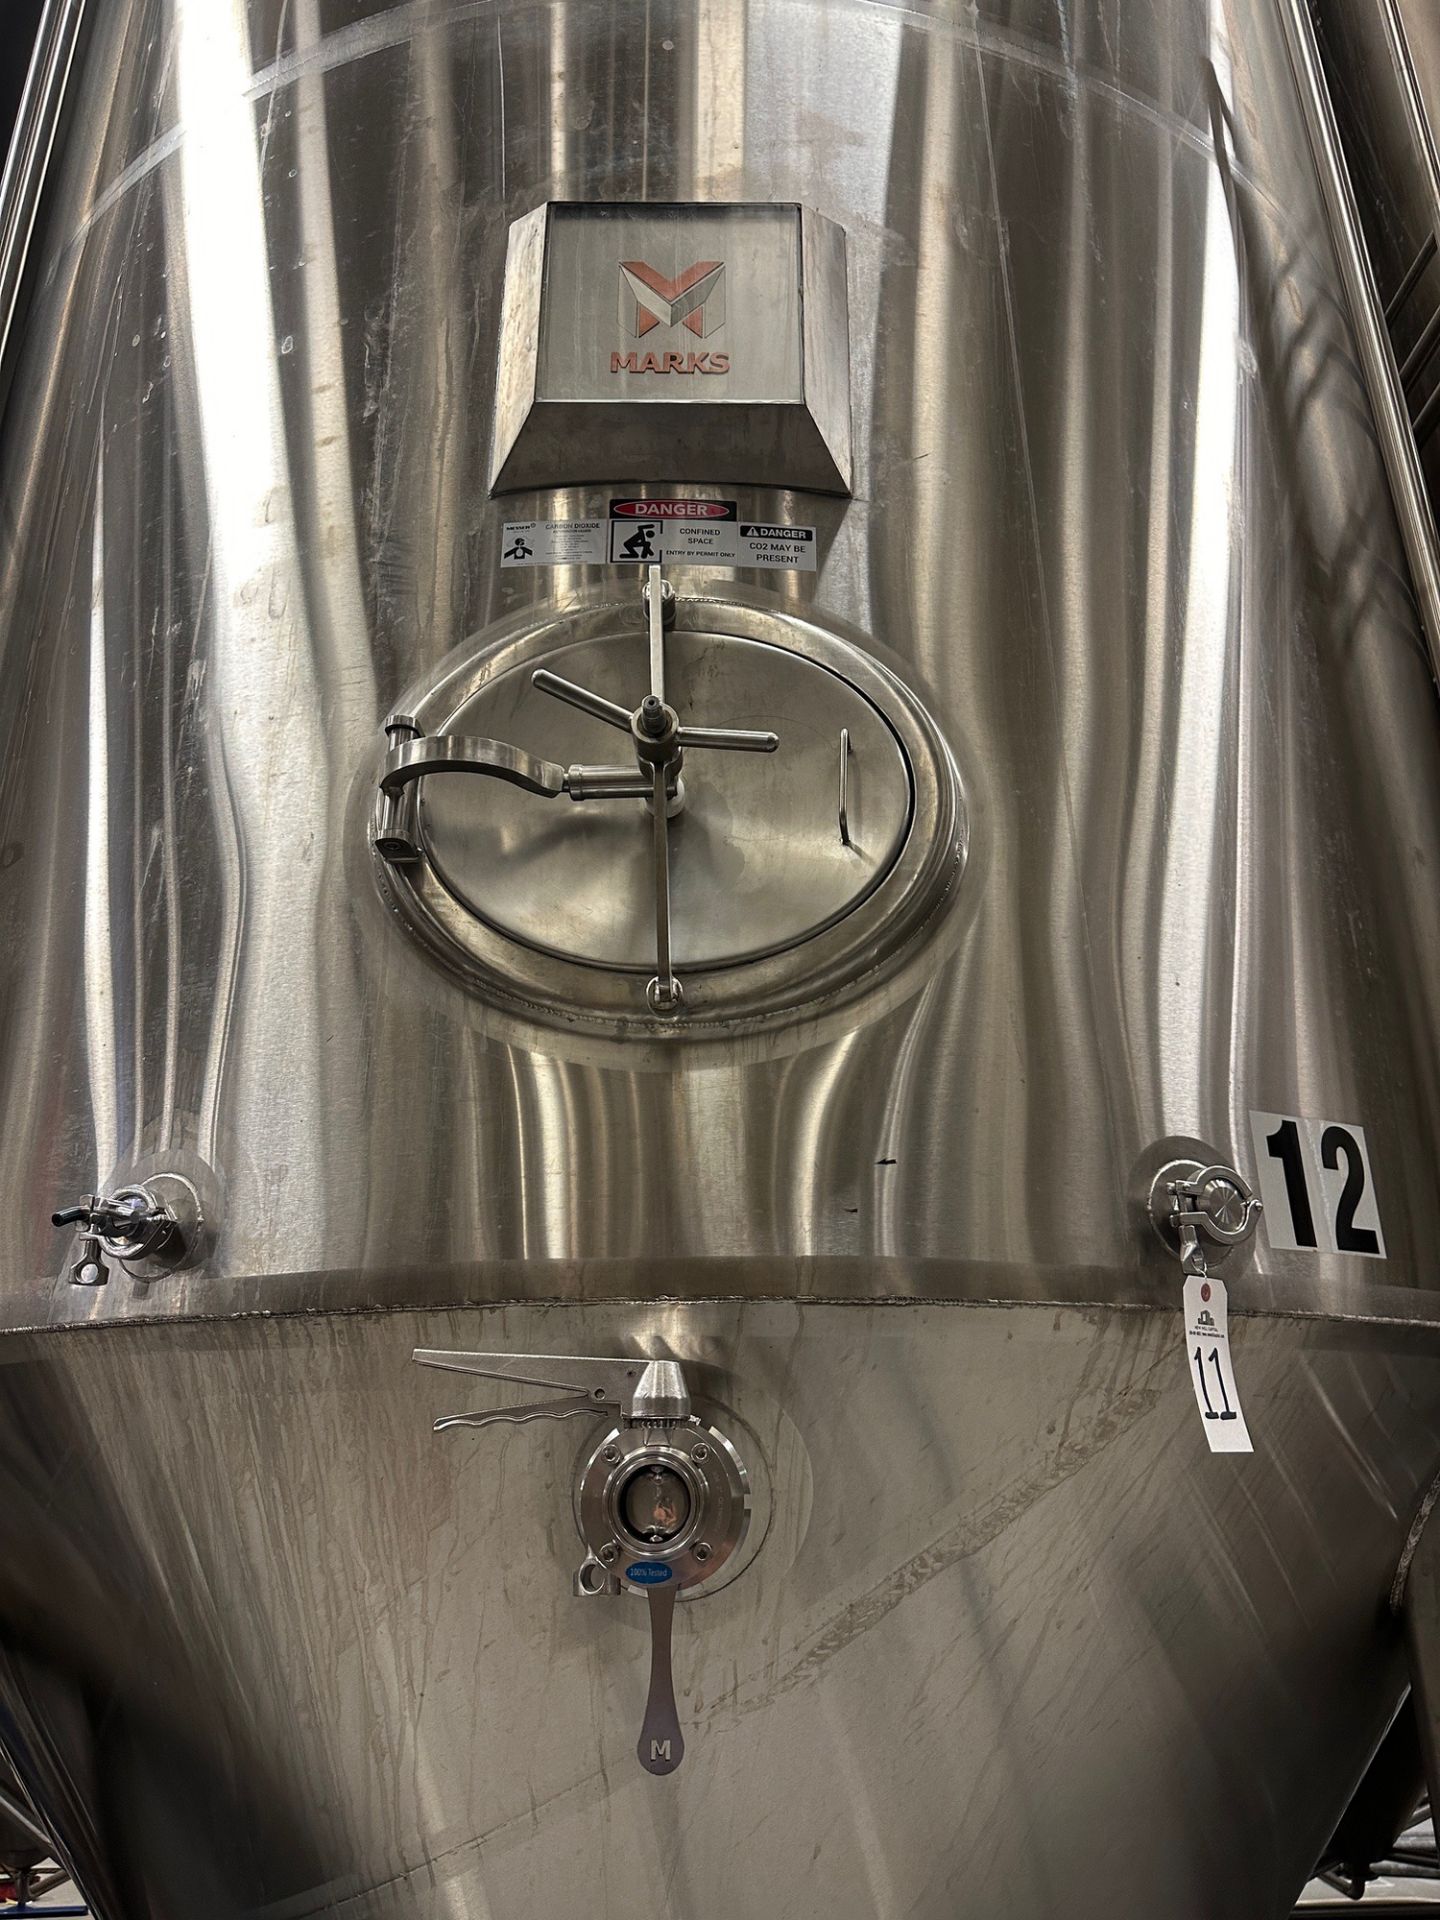 (1 of 8) 2020 Marks 132 BBL FV / 175 BBL or 5,400 Gal Max Capacity Jacketed Stainless Steel Ferm - Image 2 of 4